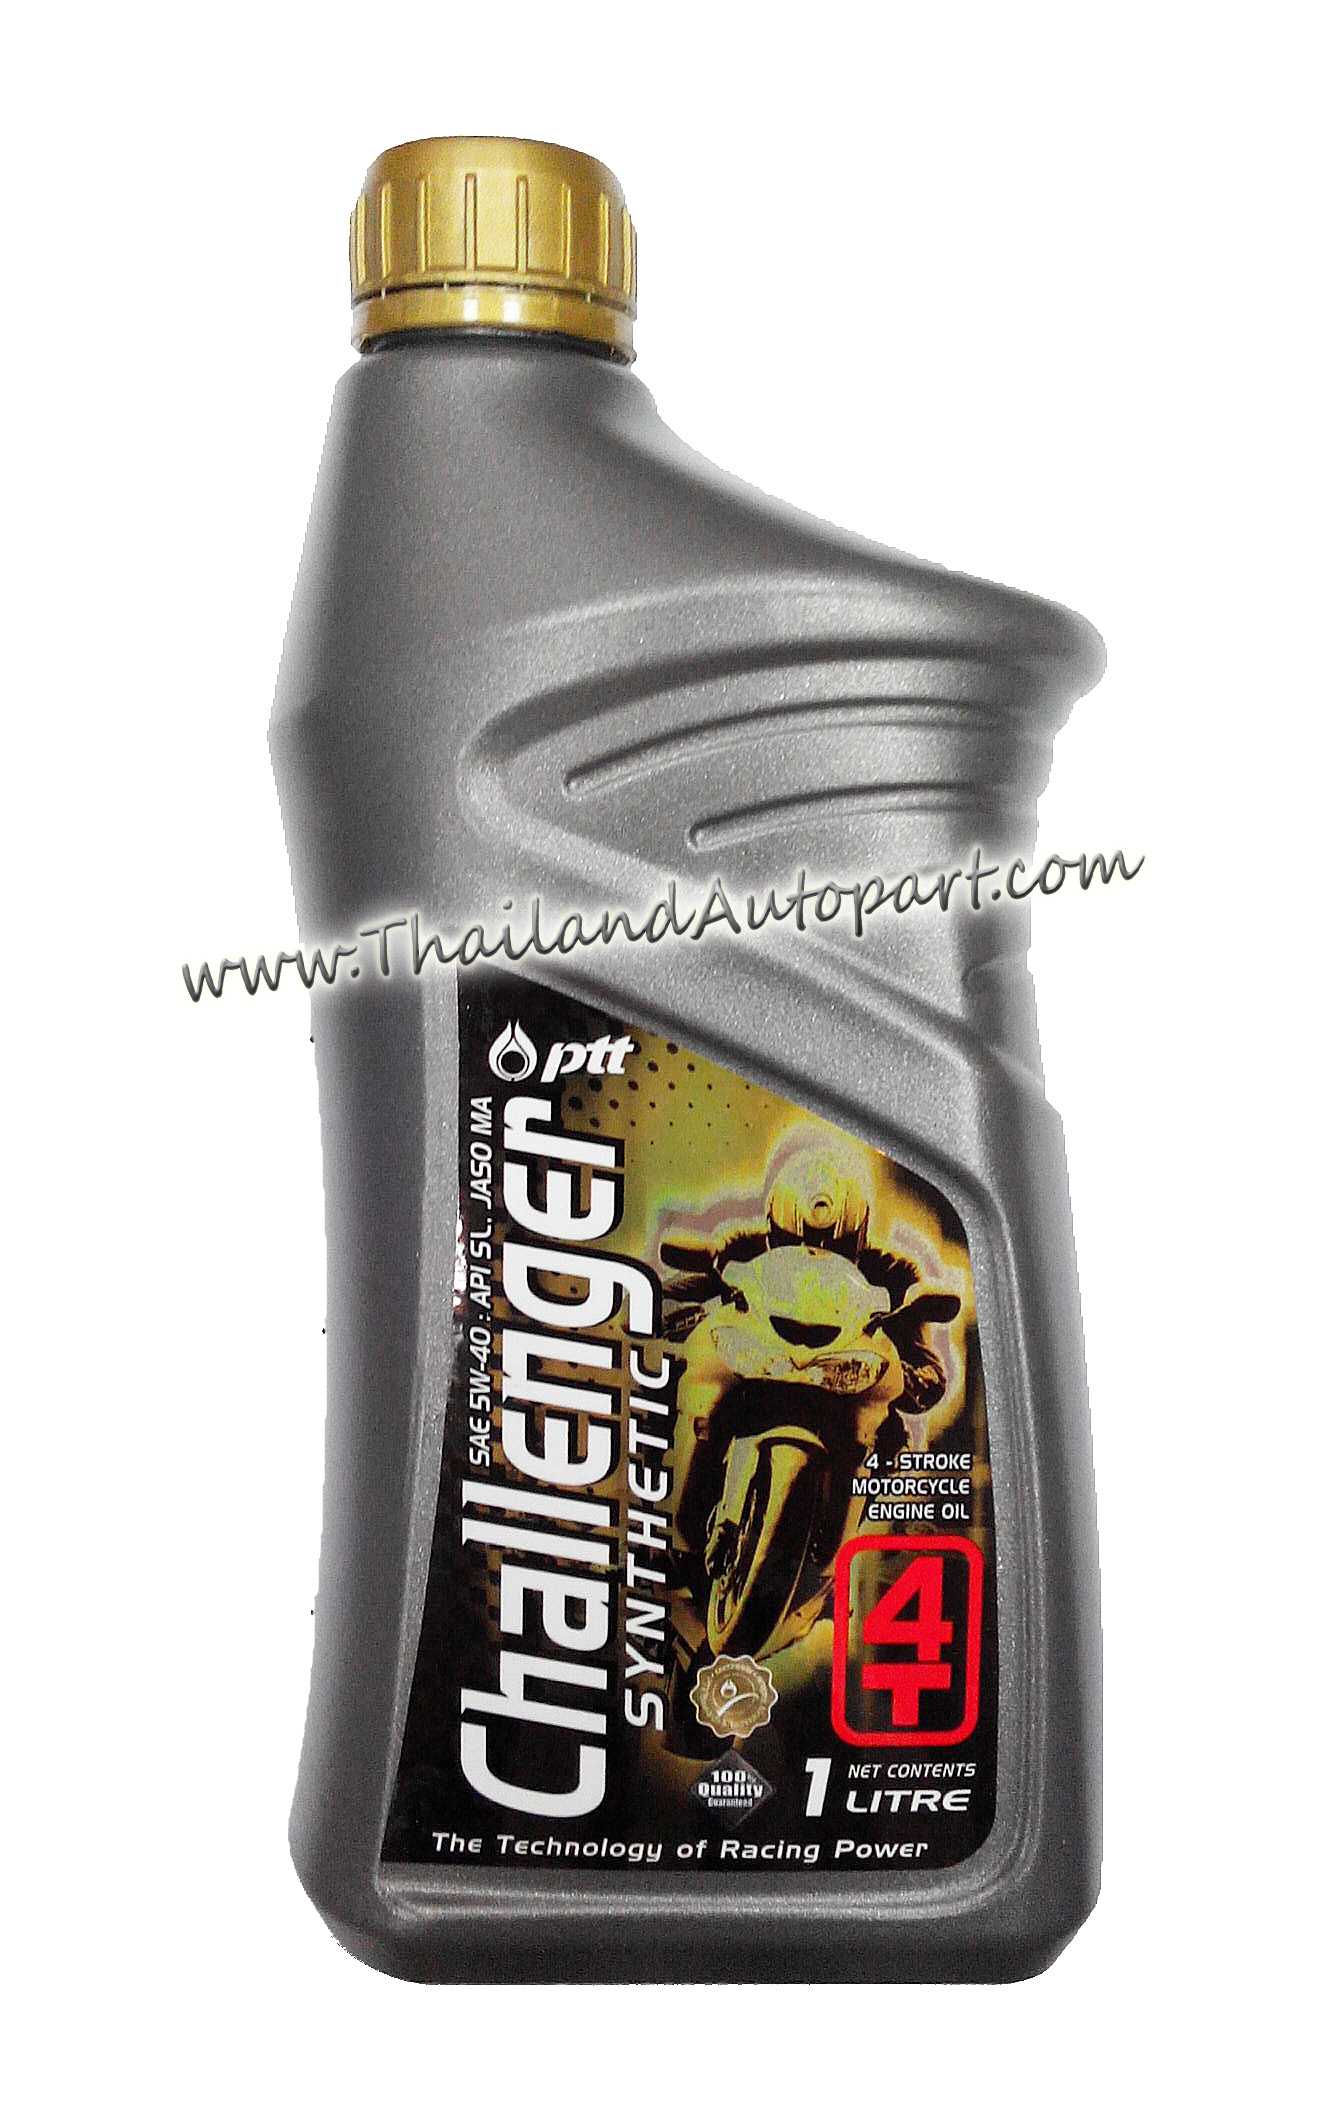 PTT CHALLENGER SYNTHETIC 4T 5W-40 FOR MOTORCYCLE